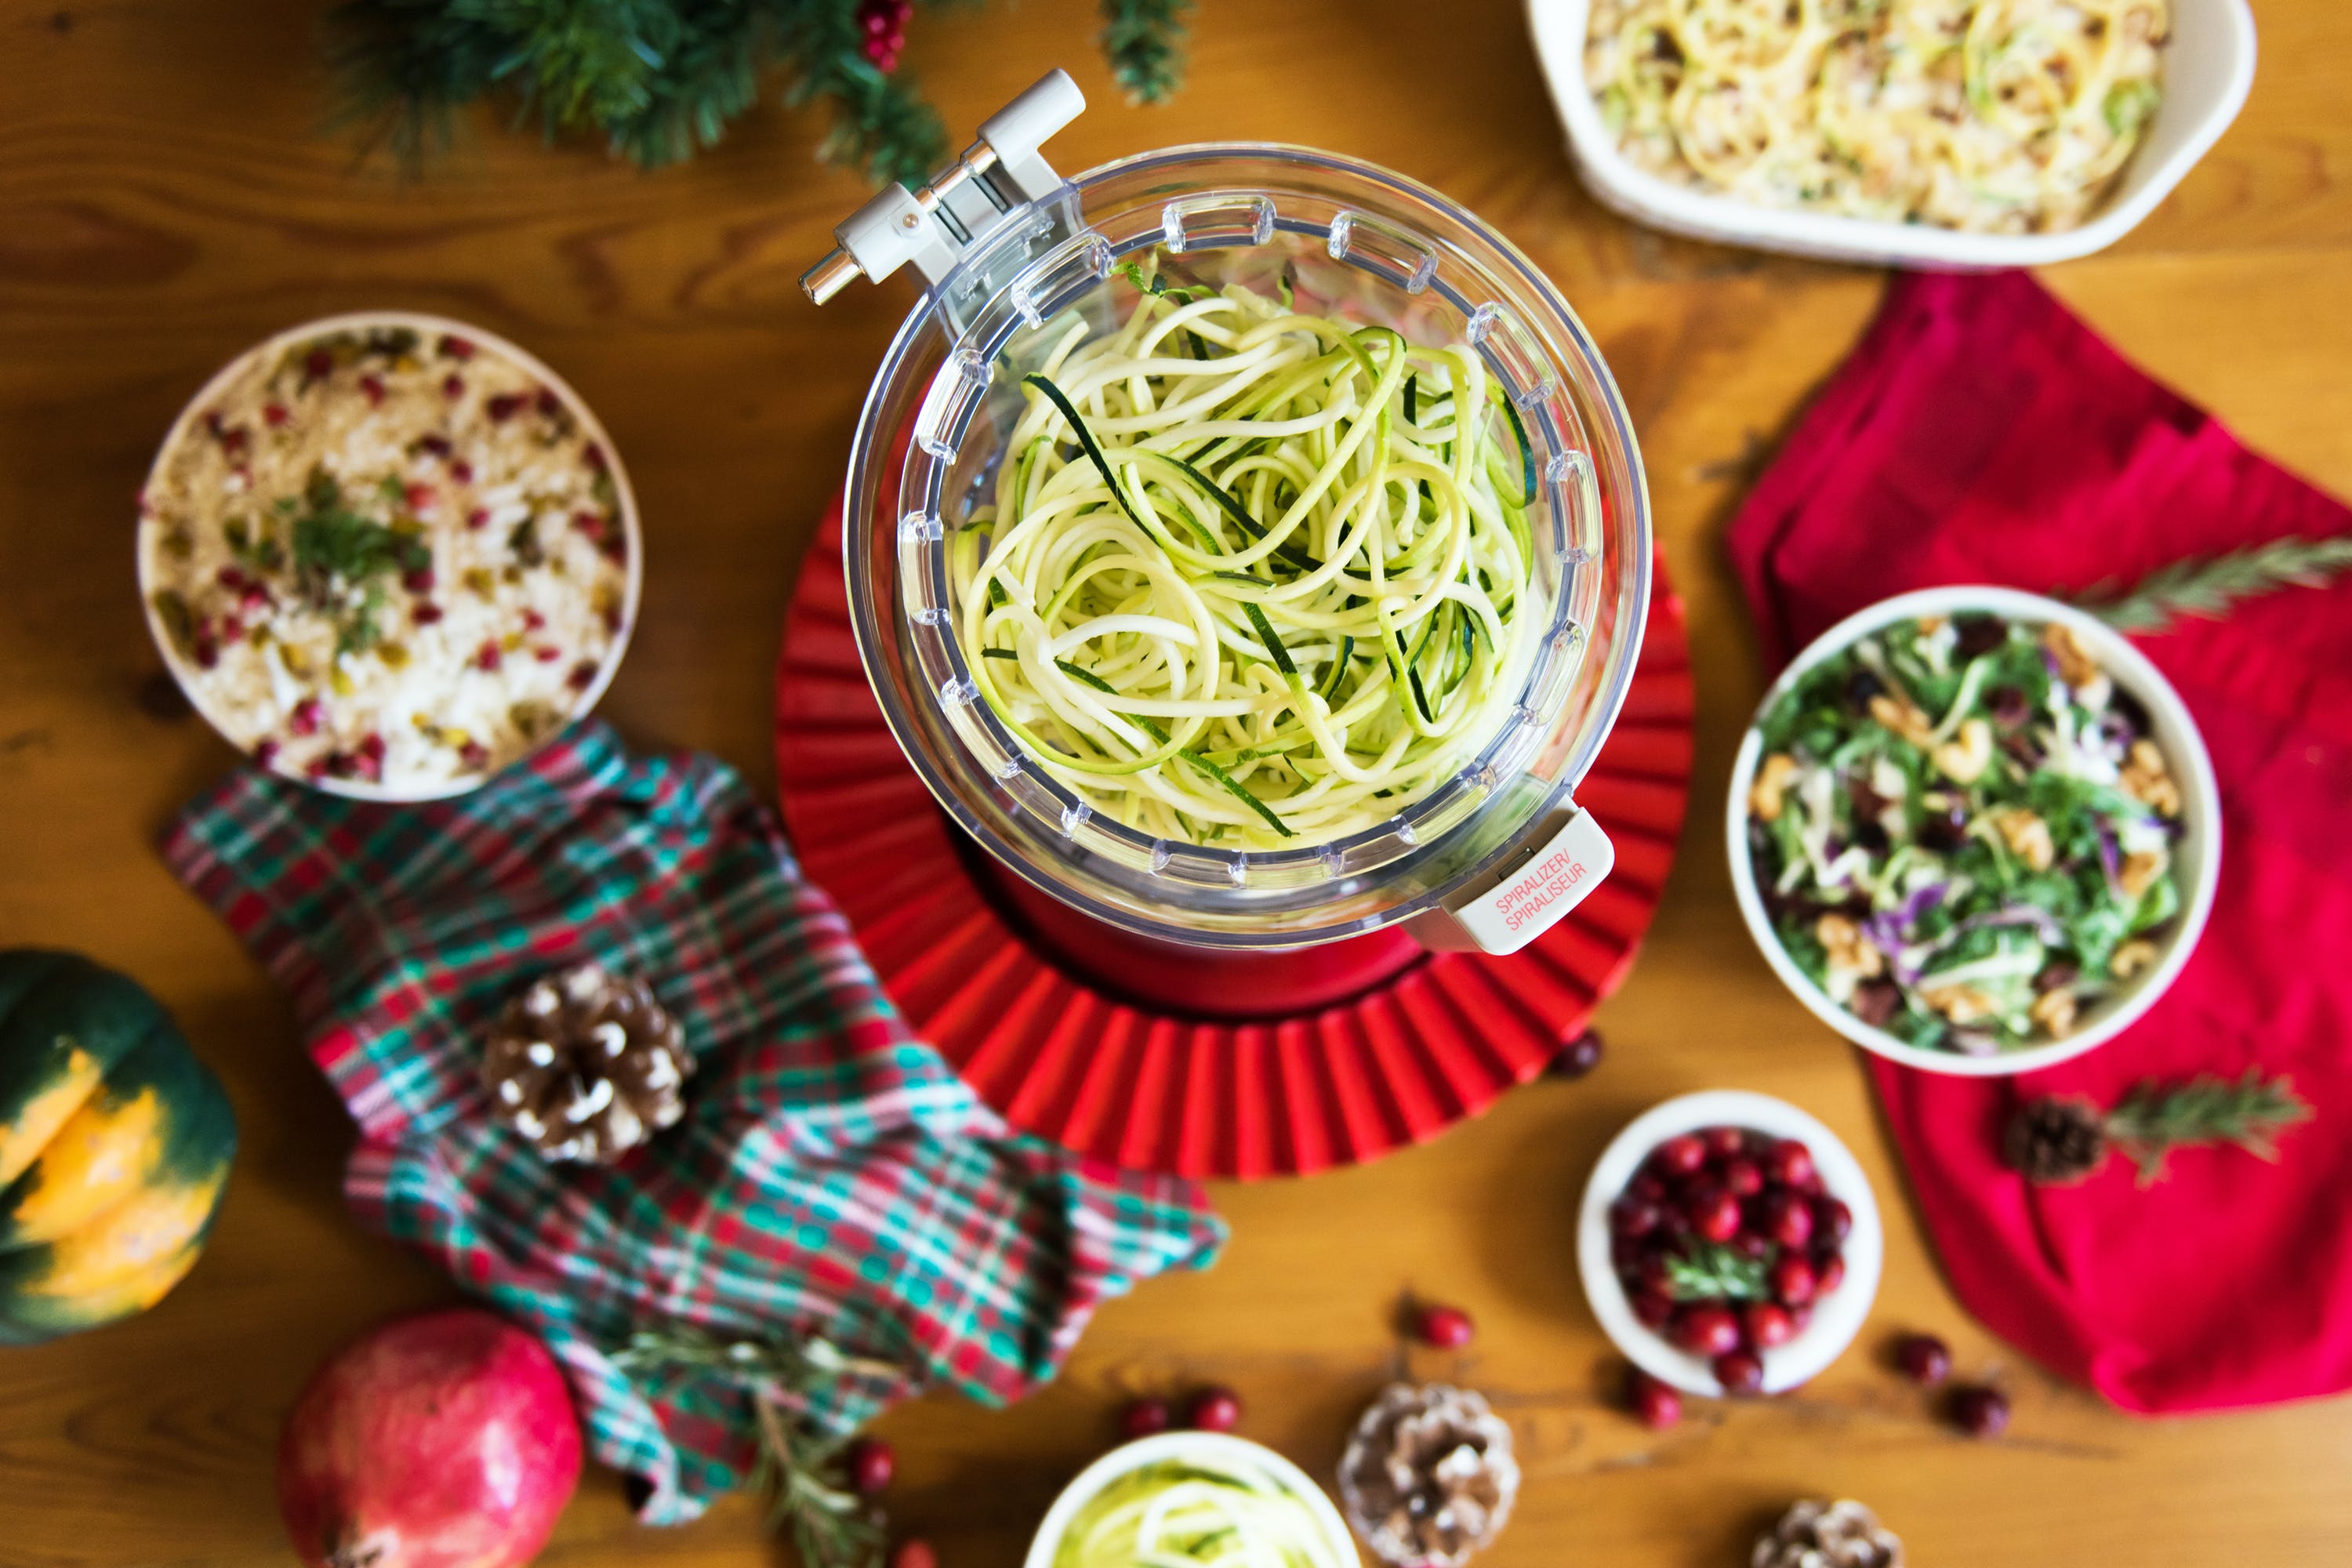 Oodles of Zoodles – Have You Tried Them Yet?